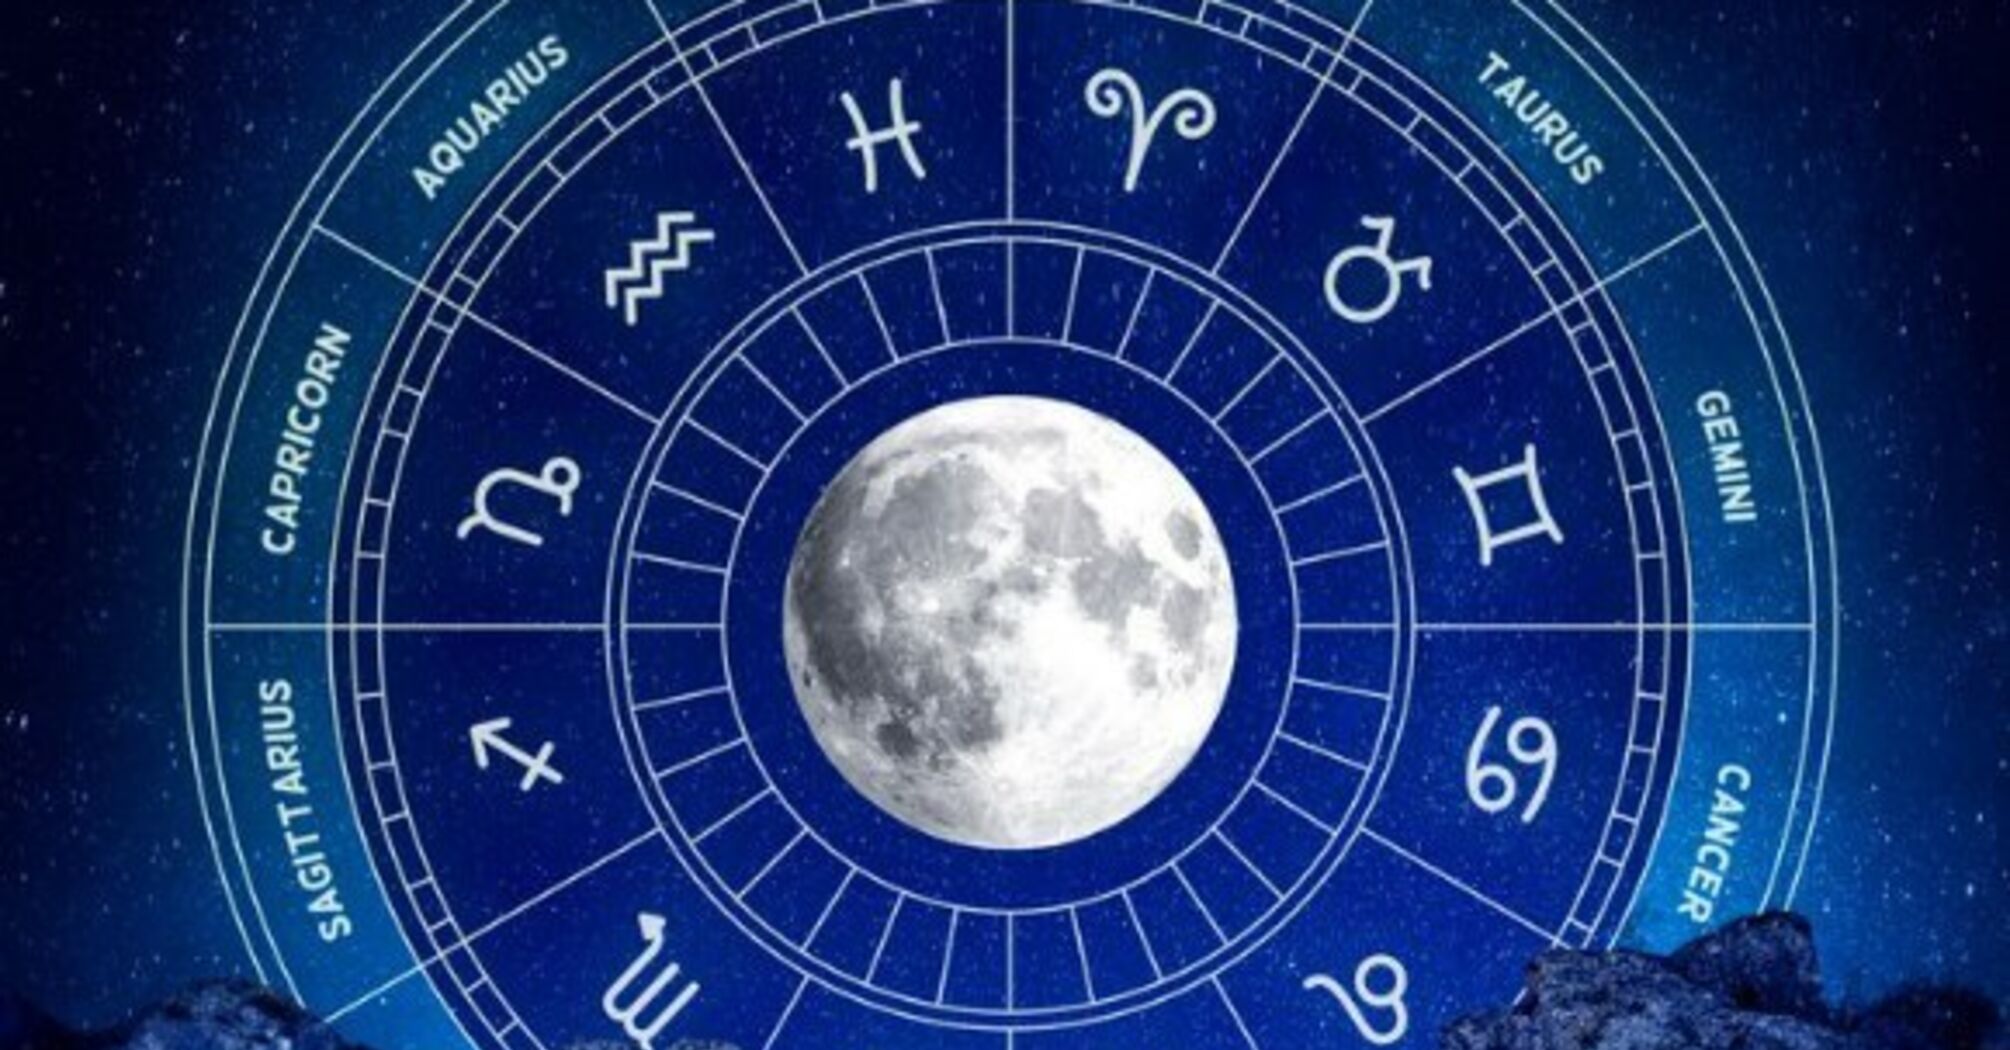 These zodiac signs will be the most jealous this week